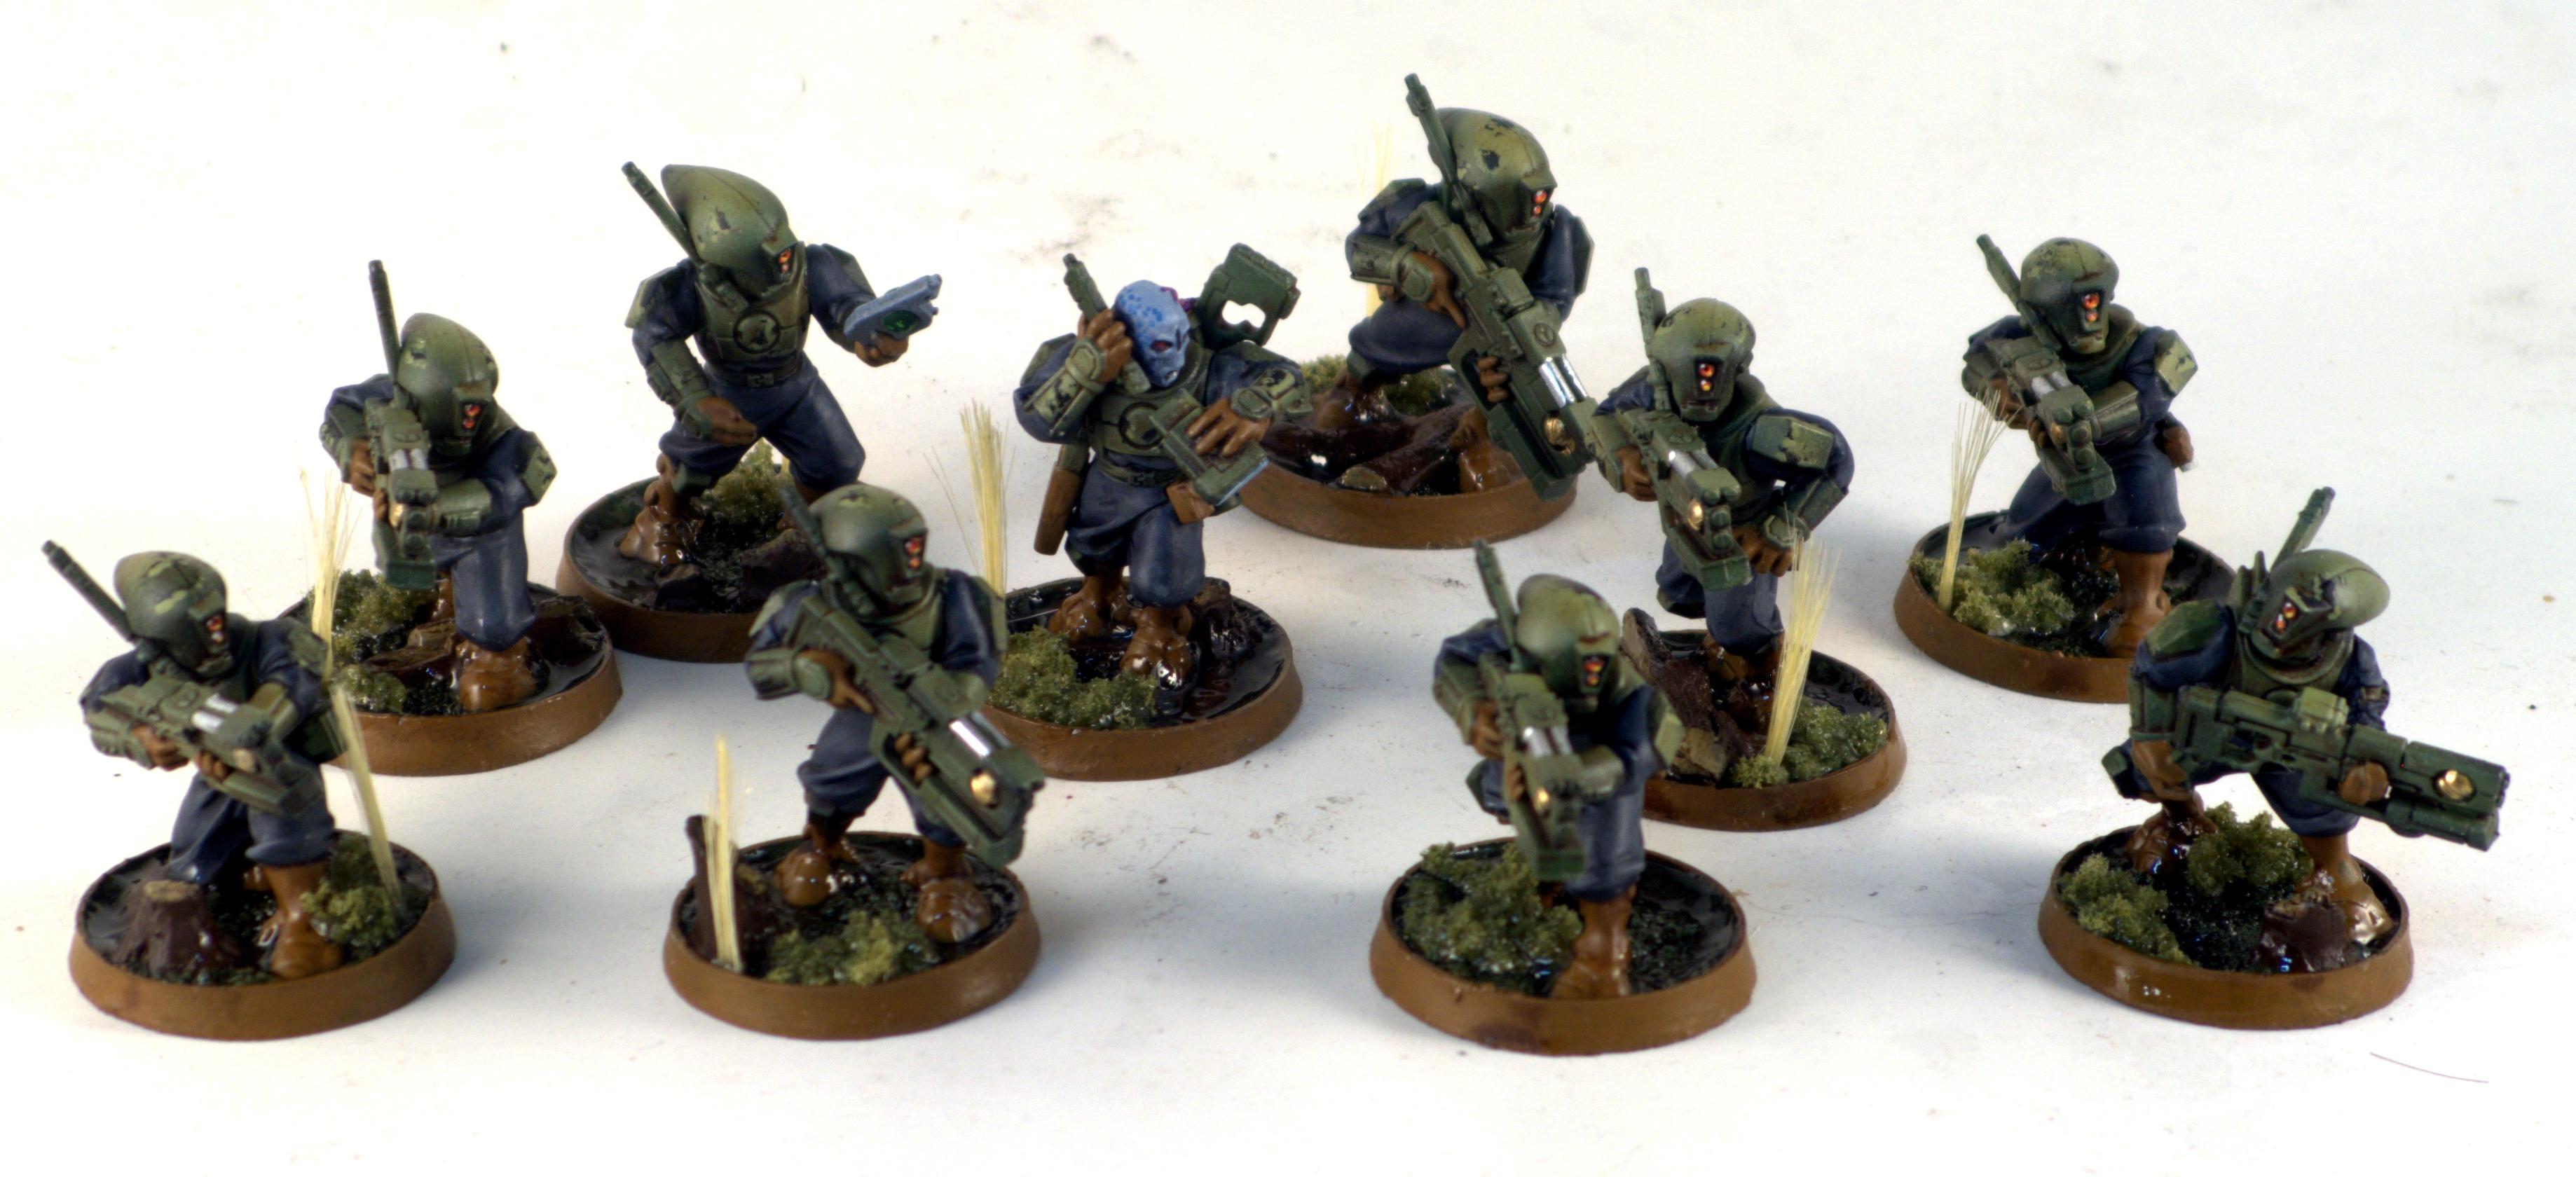 Airbrush, Airbrushed, Camouflage, Green, Pathfinders, Swamp Bases, Water Effects